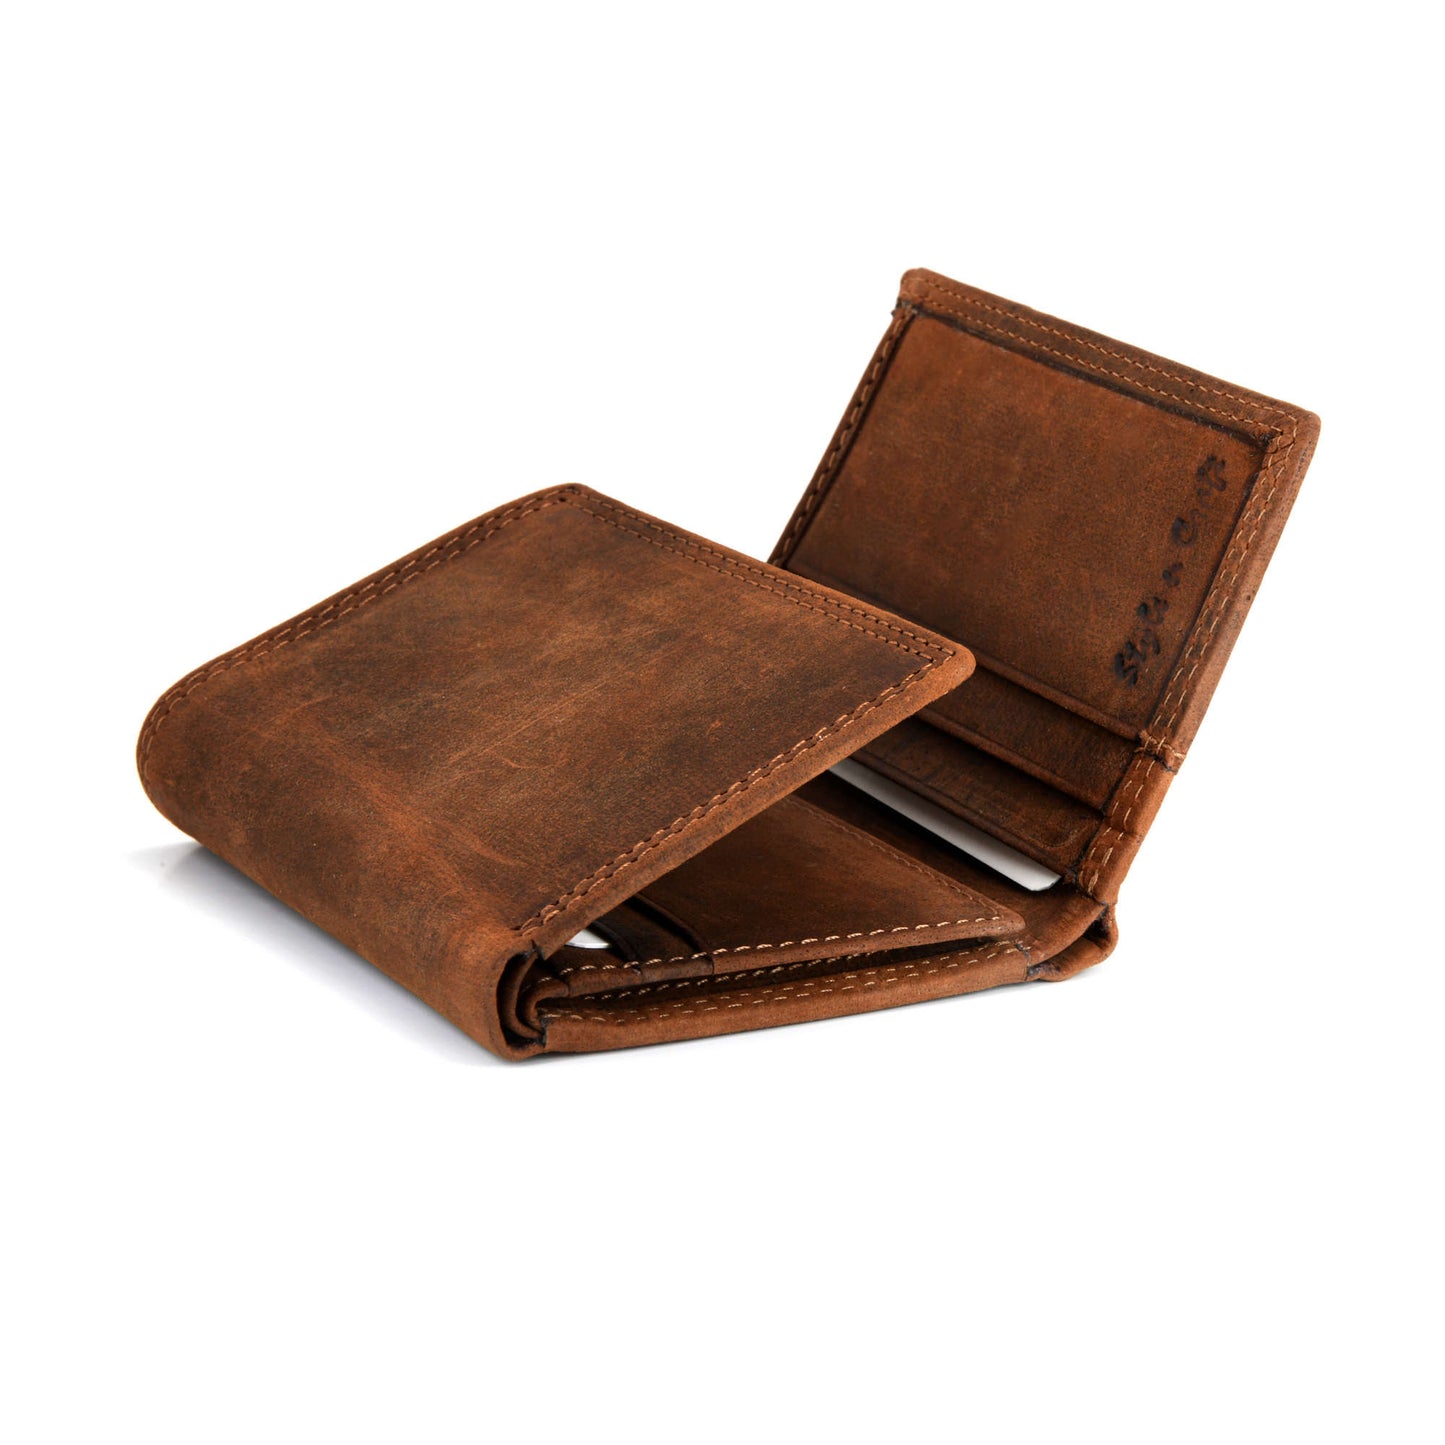 Style n Craft 300790-BR Trifold Wallet in Leather - brown color - half open view - front angled profile view